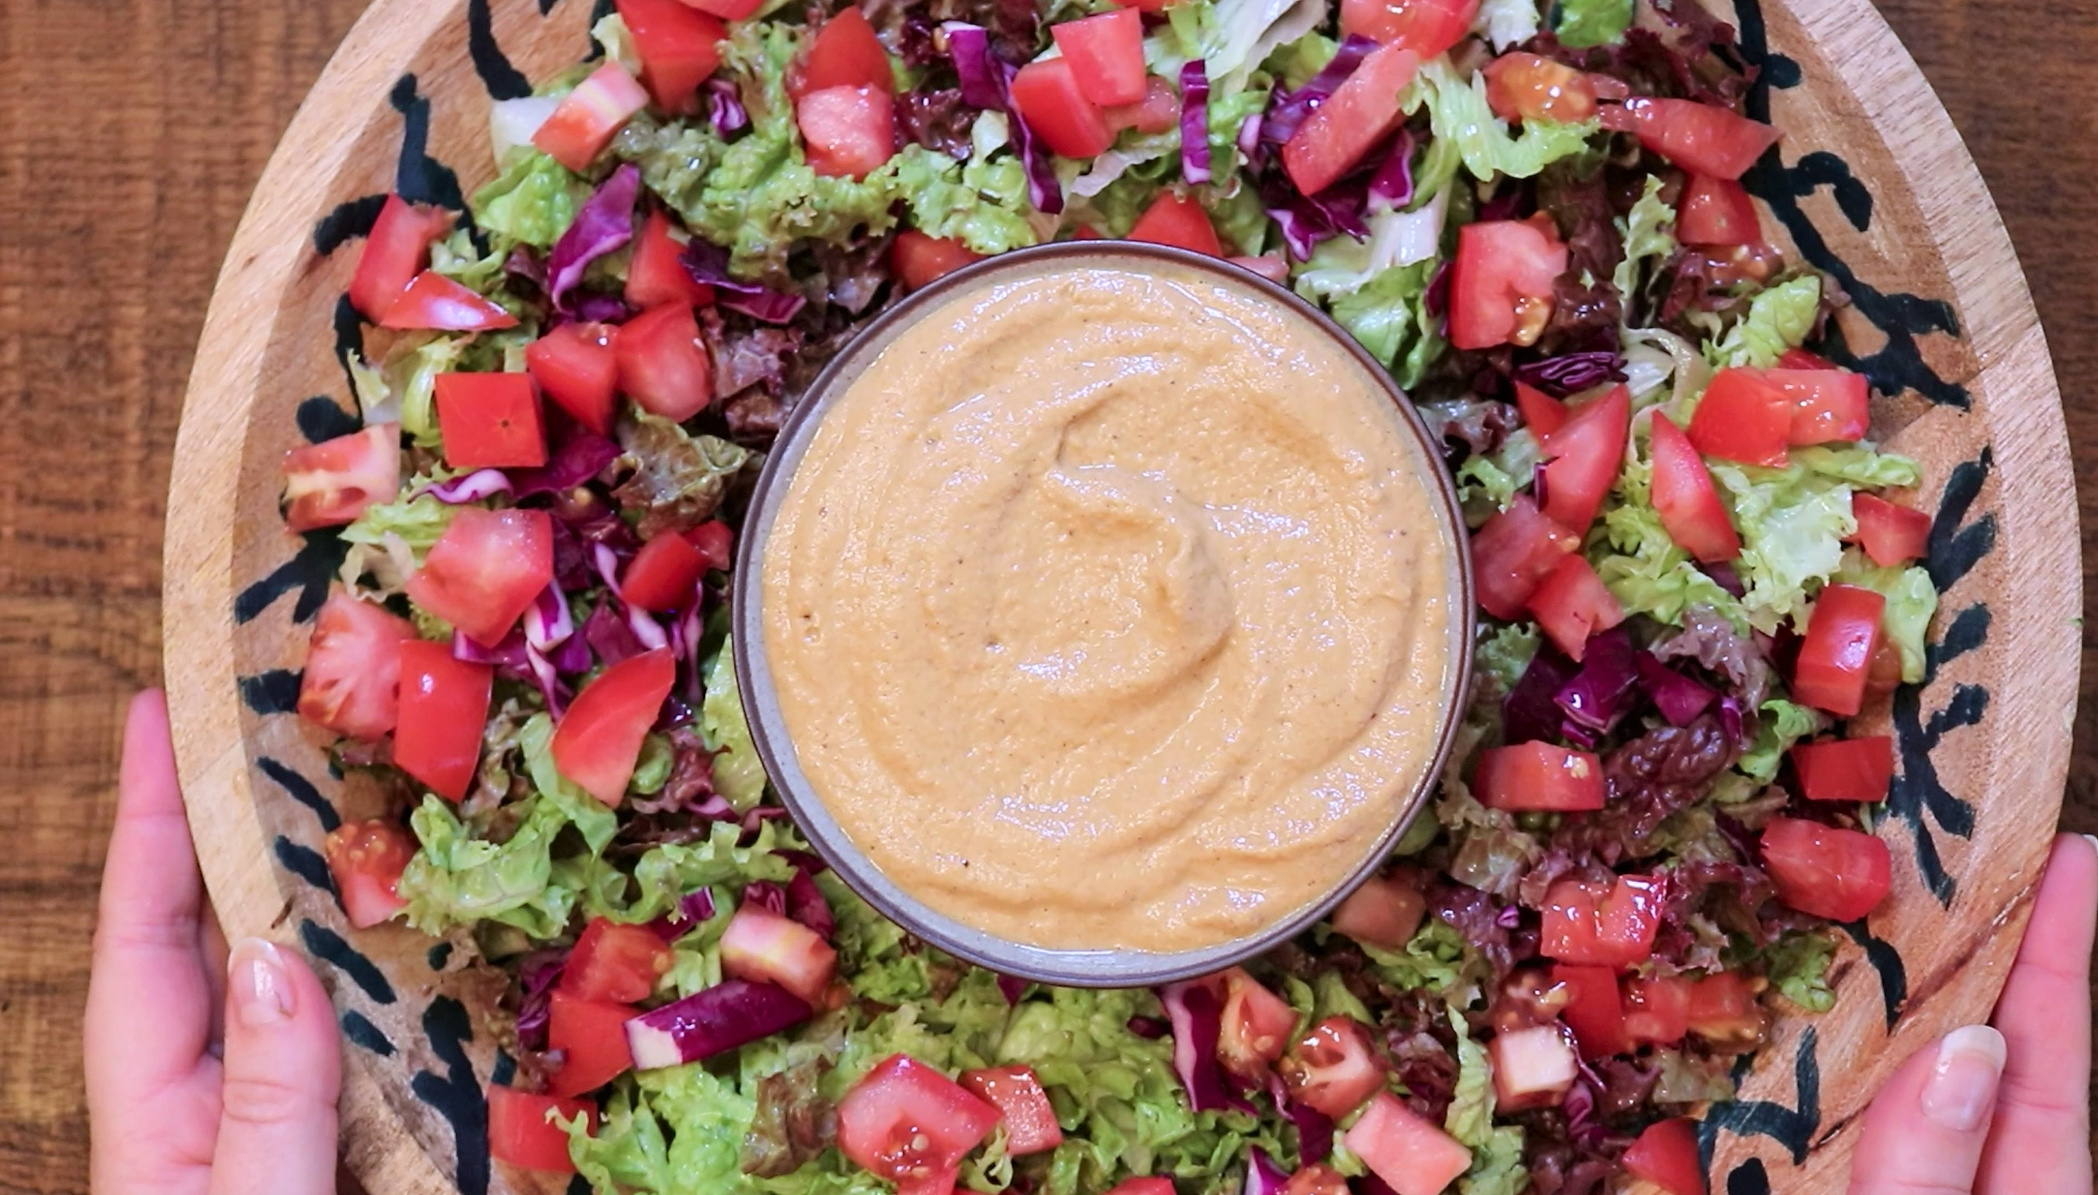 Sundried Tomato Red Pepper Salad Dressing | No Salt Added & Low Fat Raw Vegan | Cultivator Kitchen